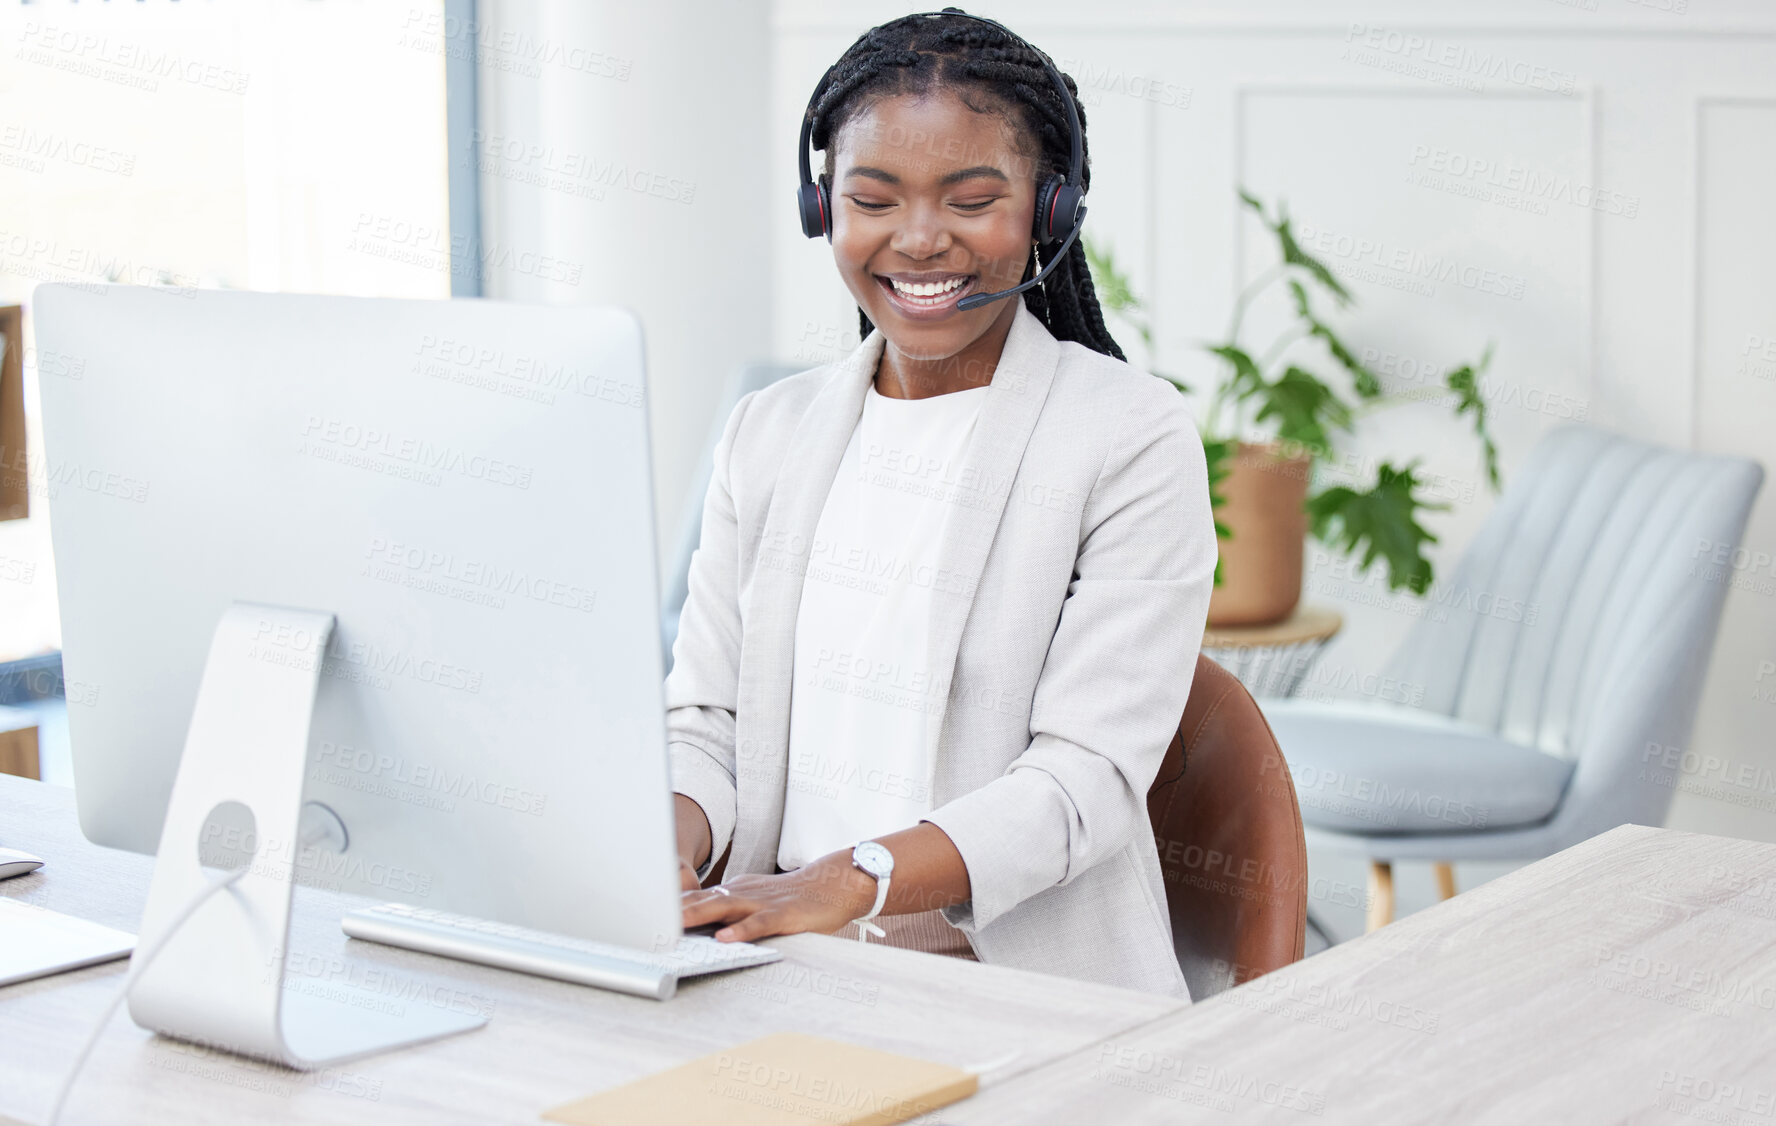 Buy stock photo Typing, advisor or black woman in telemarketing call center consulting or communication for loan advice. Finance business, customer support or virtual assistant talking on computer online in office